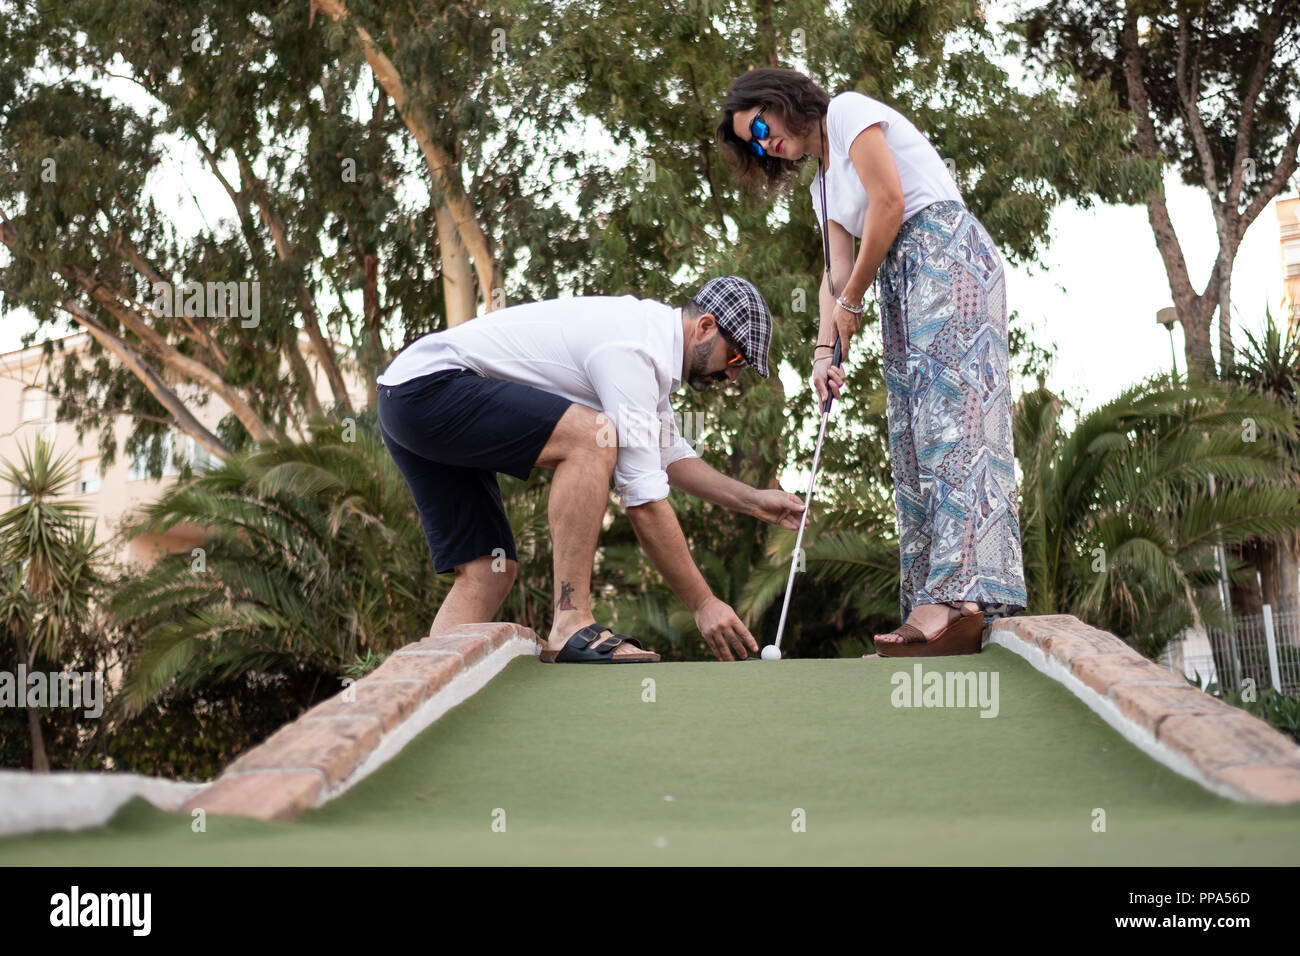 man giving golf lesson to woman Stock Photo